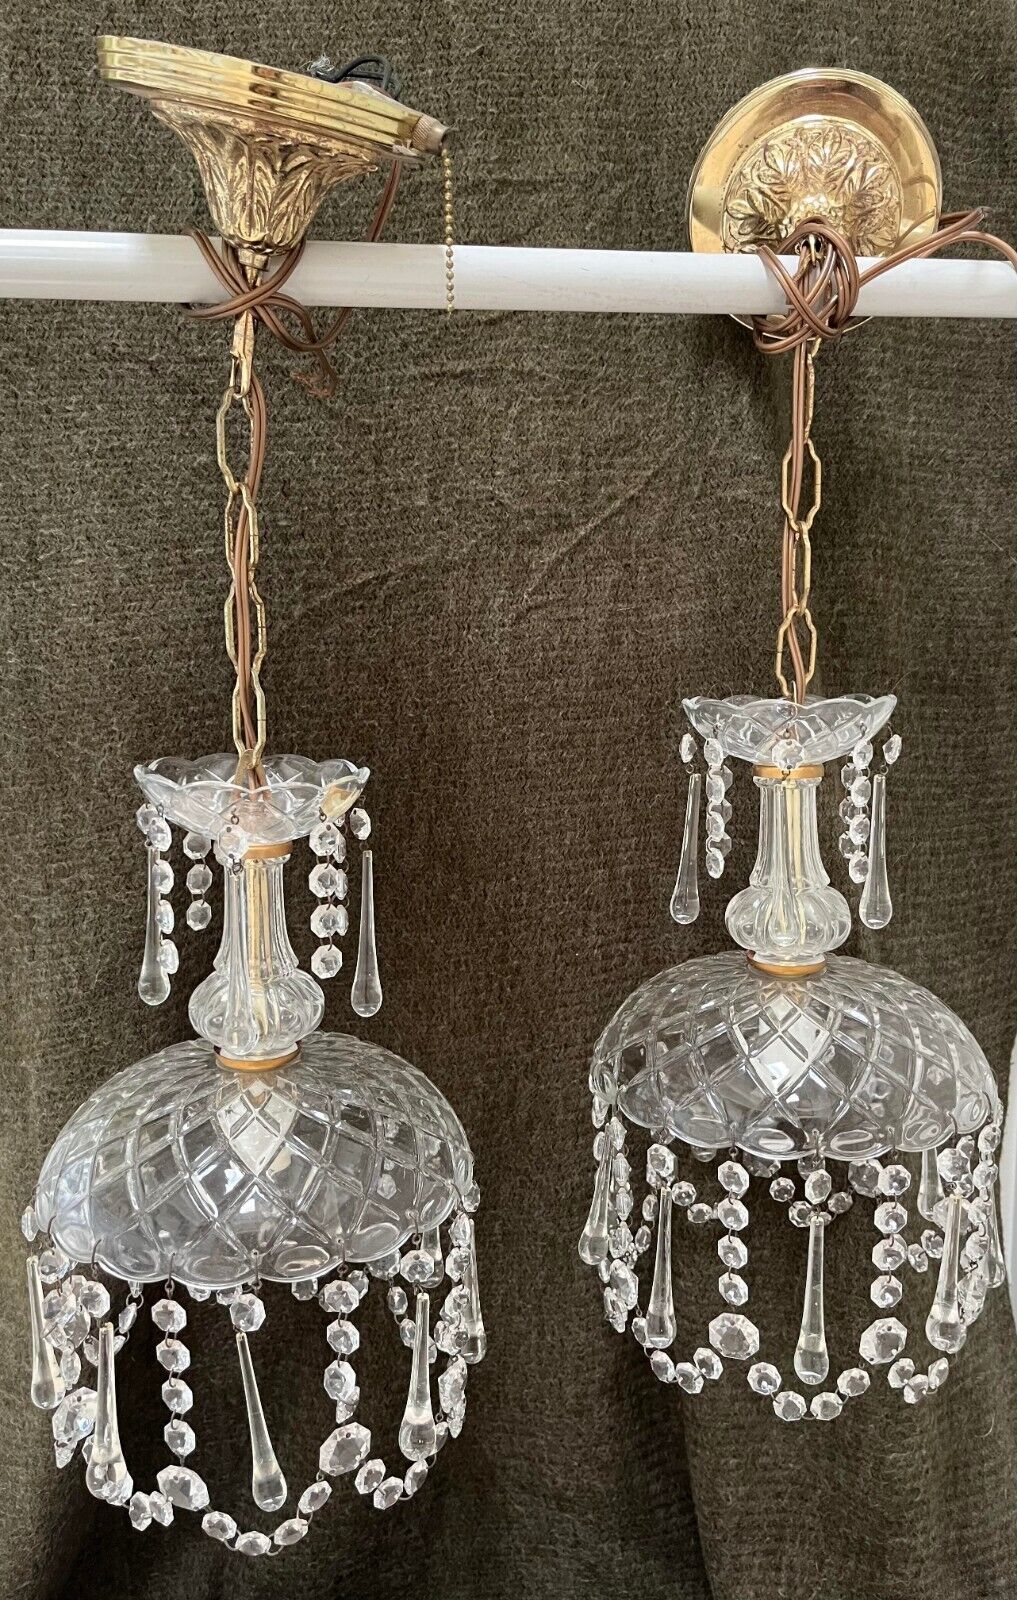 pair (2) small vintage parlor boudoir crystal chandeliers sconces or ceiling